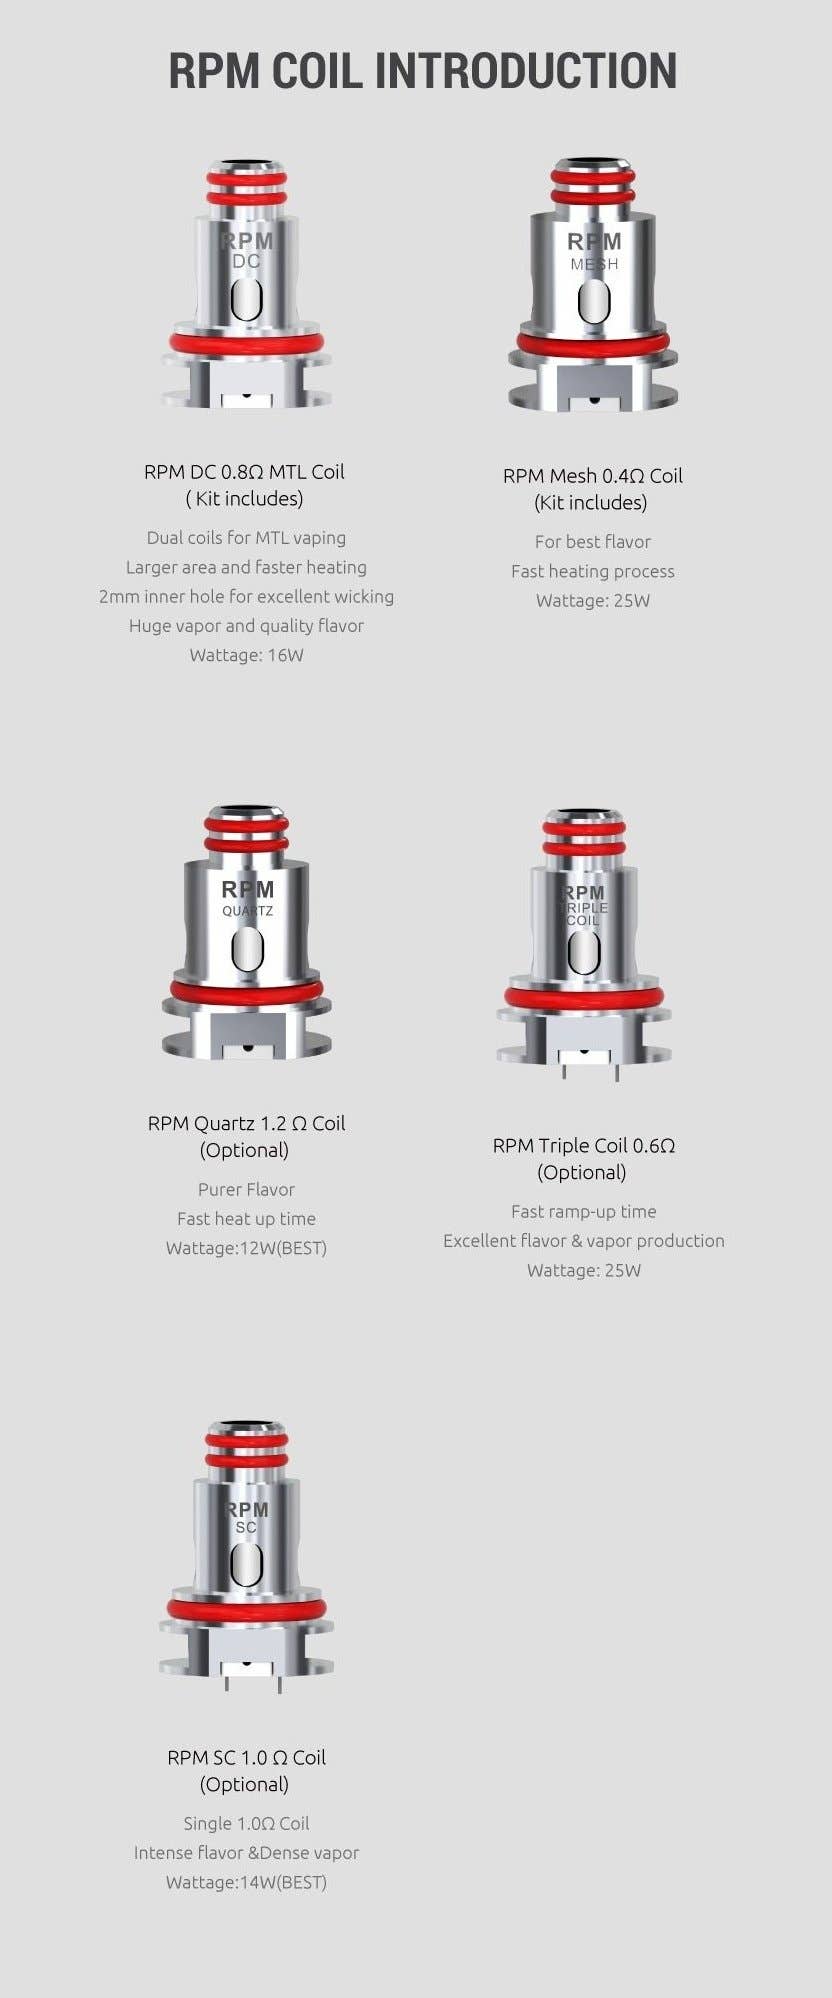 Stick R22 is powered by RPM coils, offering a great choice of options for all vaping styles.